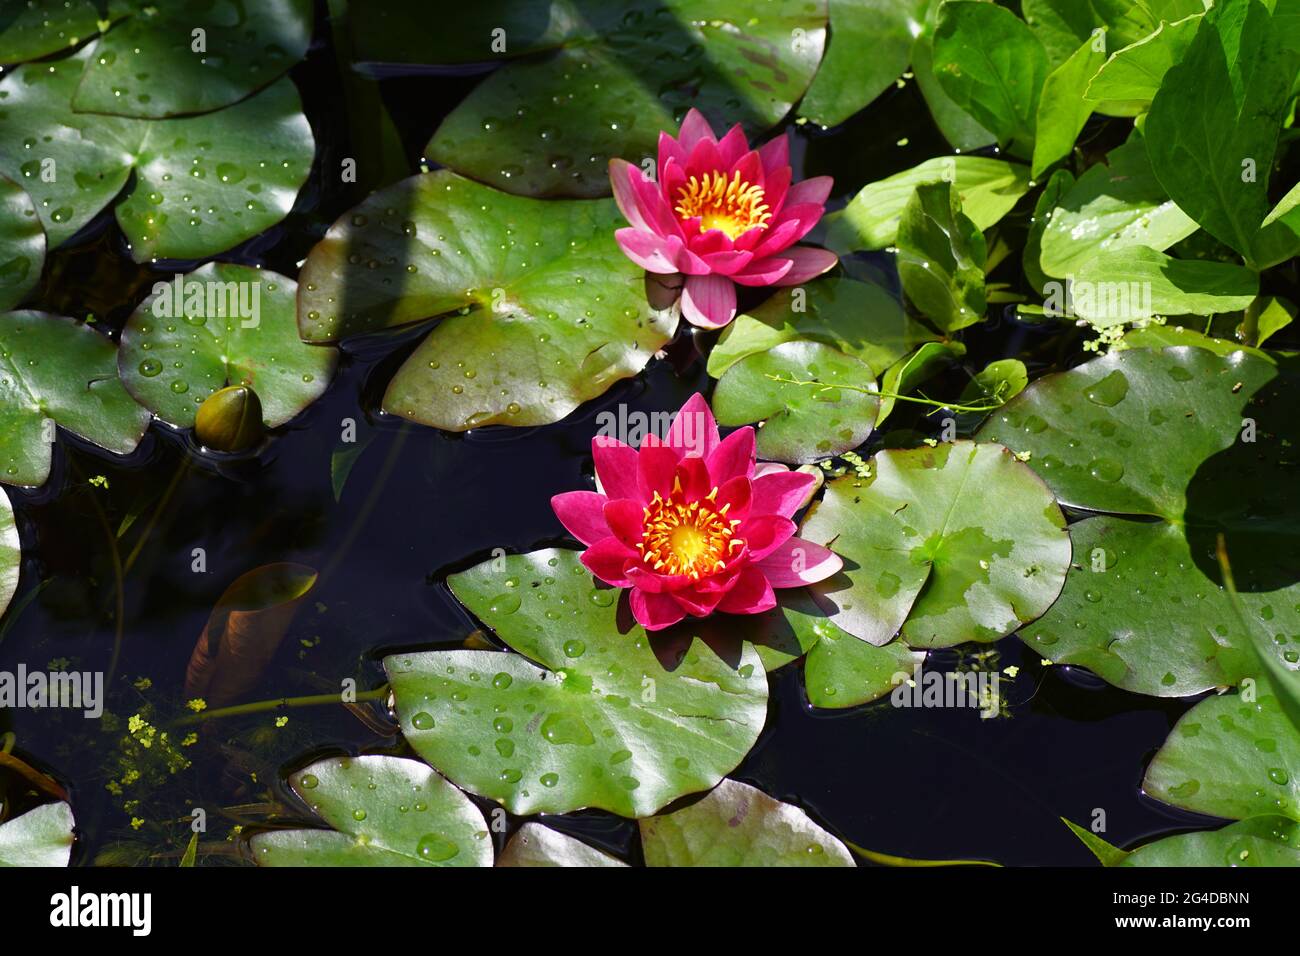 Red flowers of the water lily Nymphaea firecrest with yellow stamens in a pond in a Dutch garden in June. Stock Photo